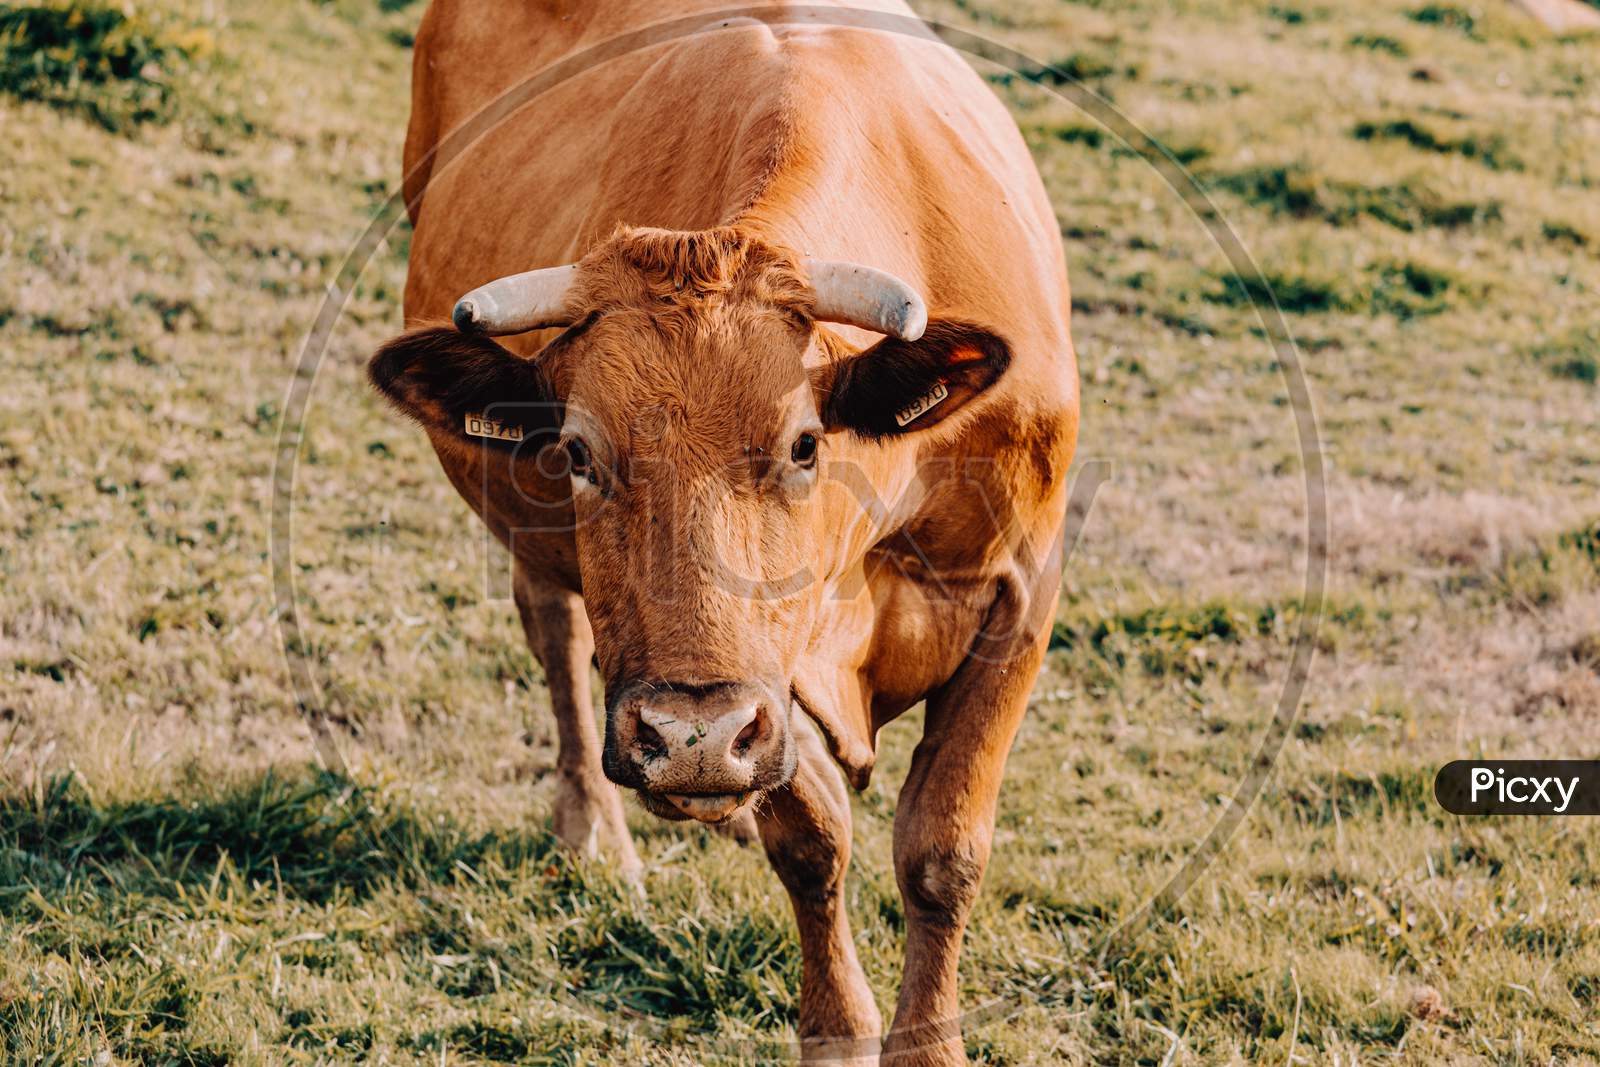 Giant Brown Cow Walking Towards The Camera On A Sunny Day In The Farm